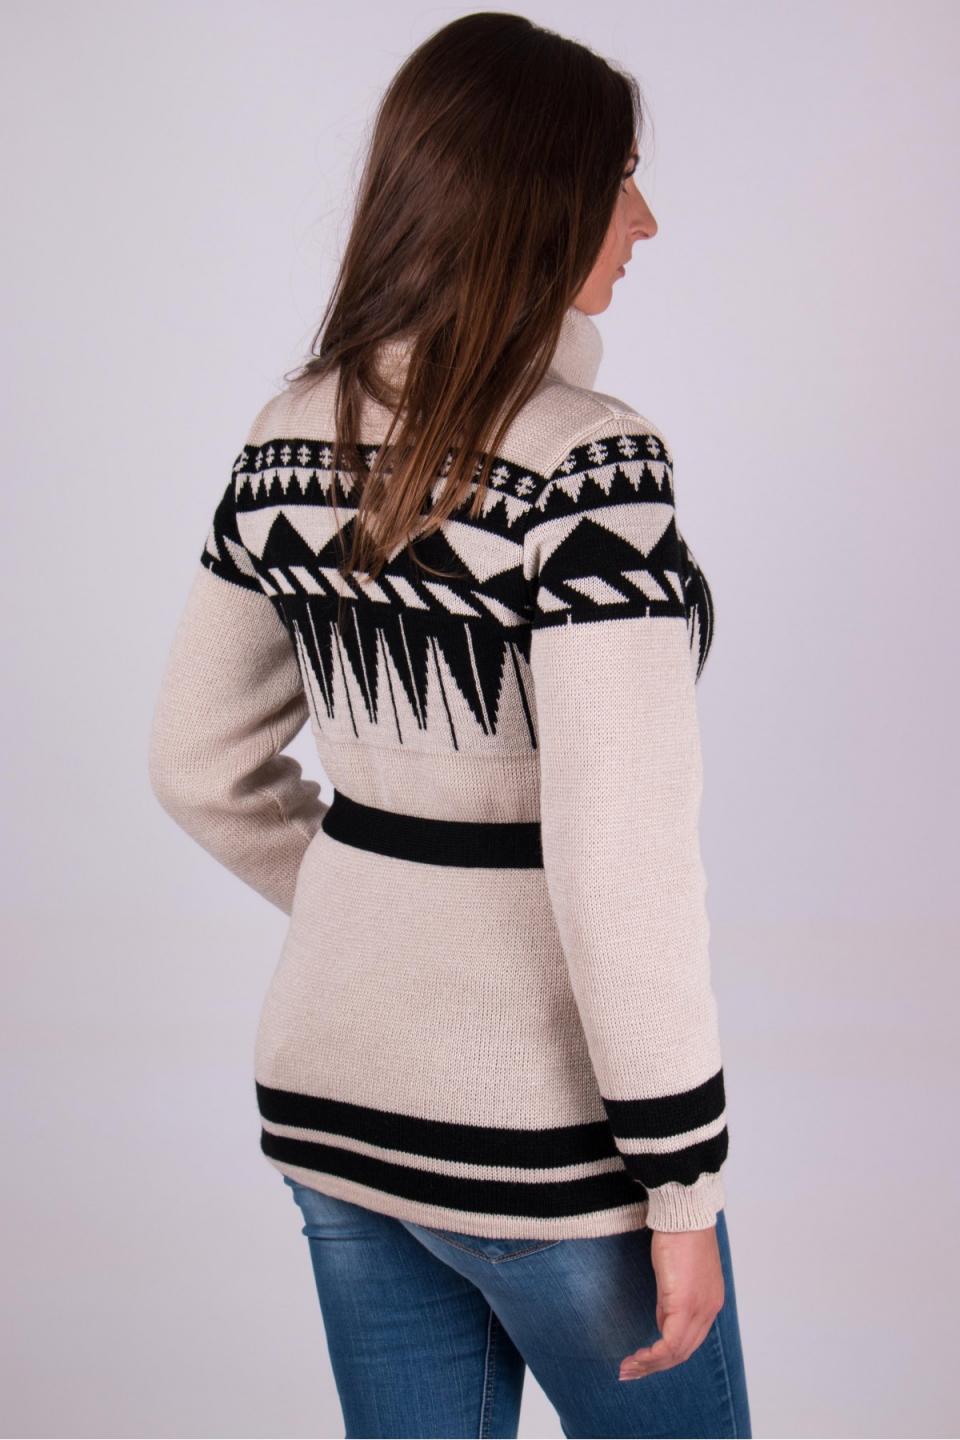 Knitted sweater with a zipper &quot;Toffee&quot; (linen, black)